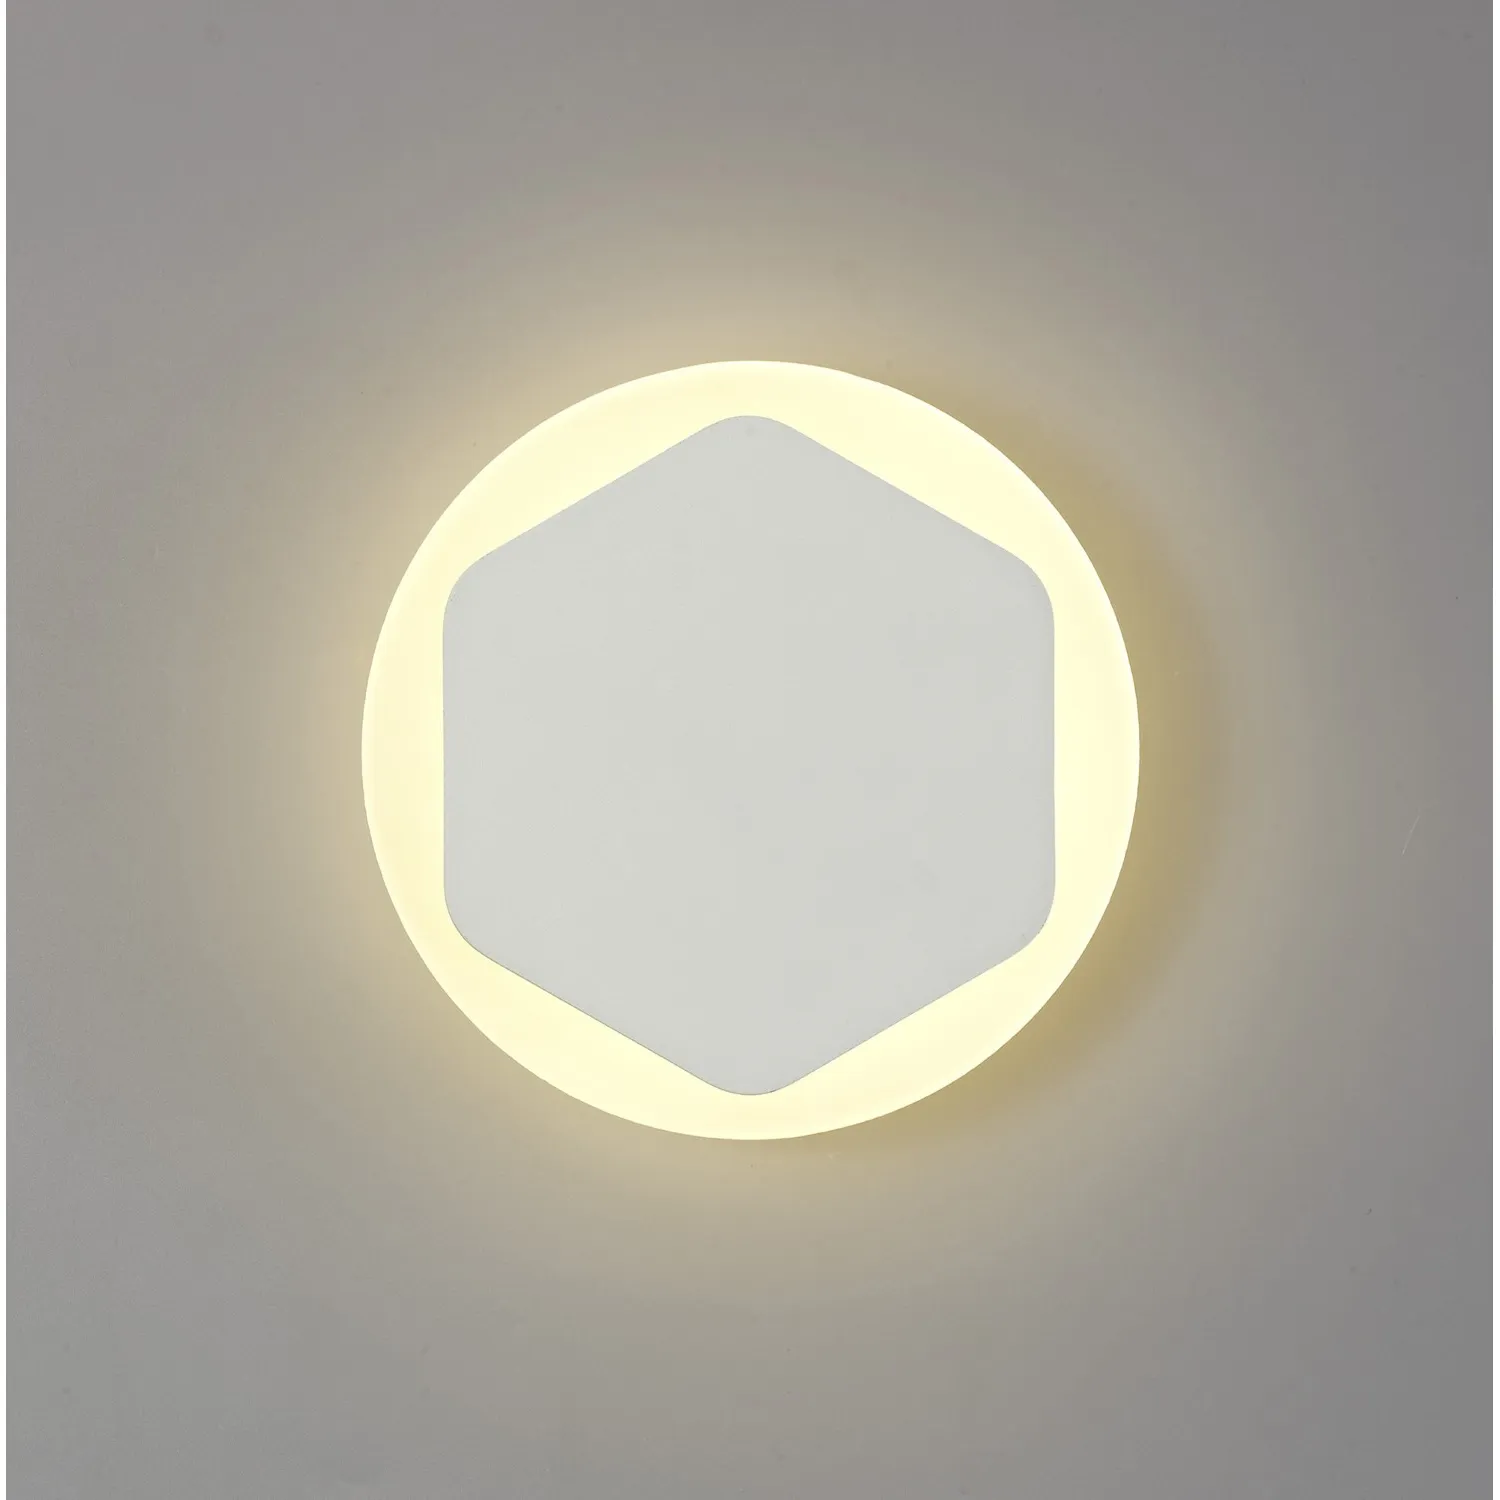 Edgware Magnetic Base Wall Lamp, 12W LED 3000K 498lm, 15 19cm Vertical Hexagonal Centre, Sand White Round Acrylic Frosted Diffuser